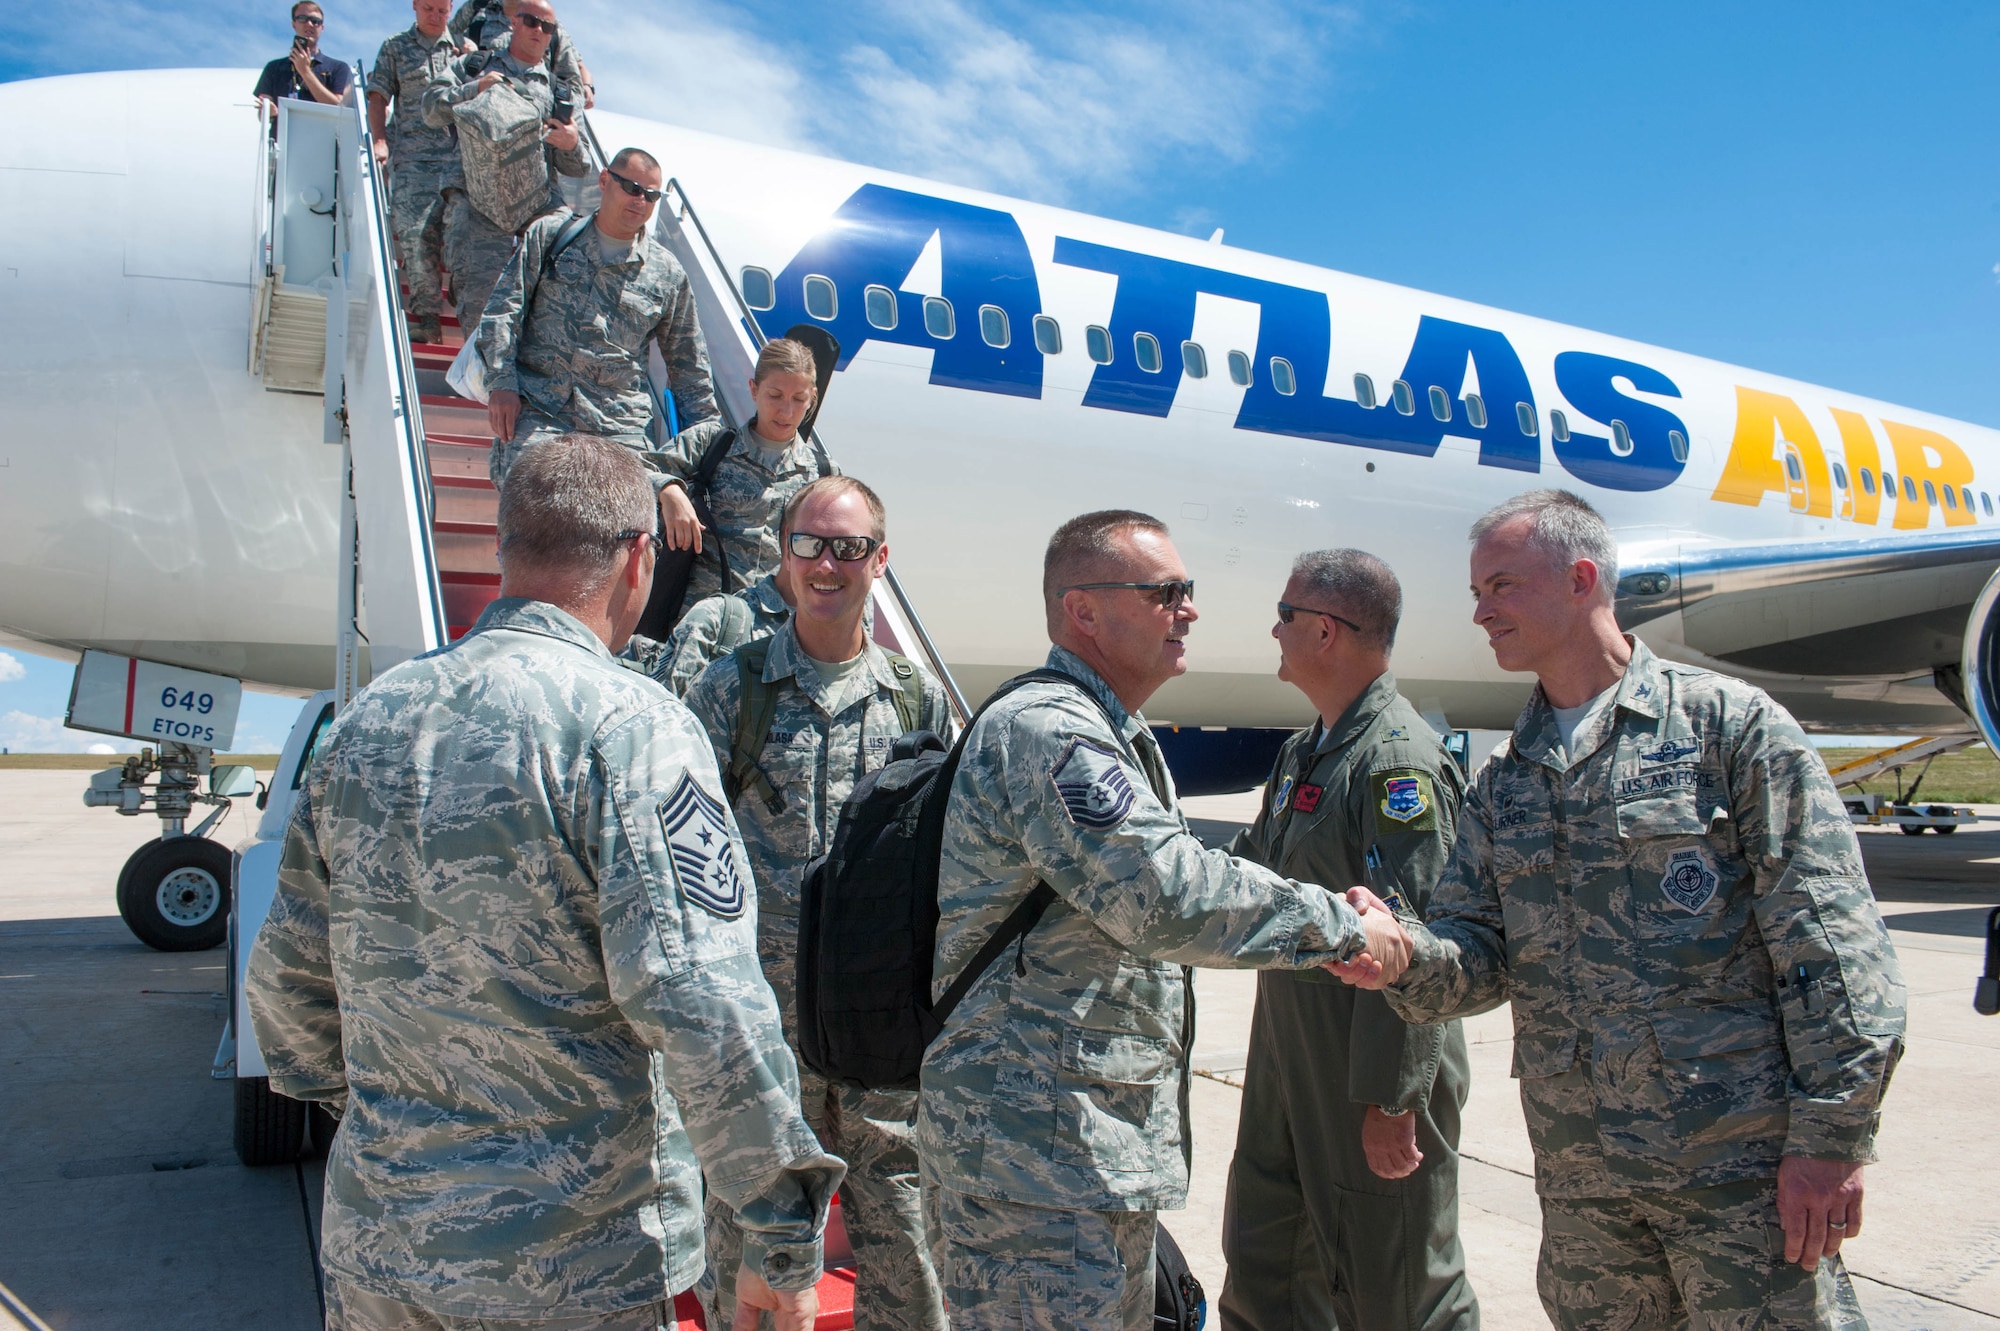 Commanders greeting Airmen as they come off airliner